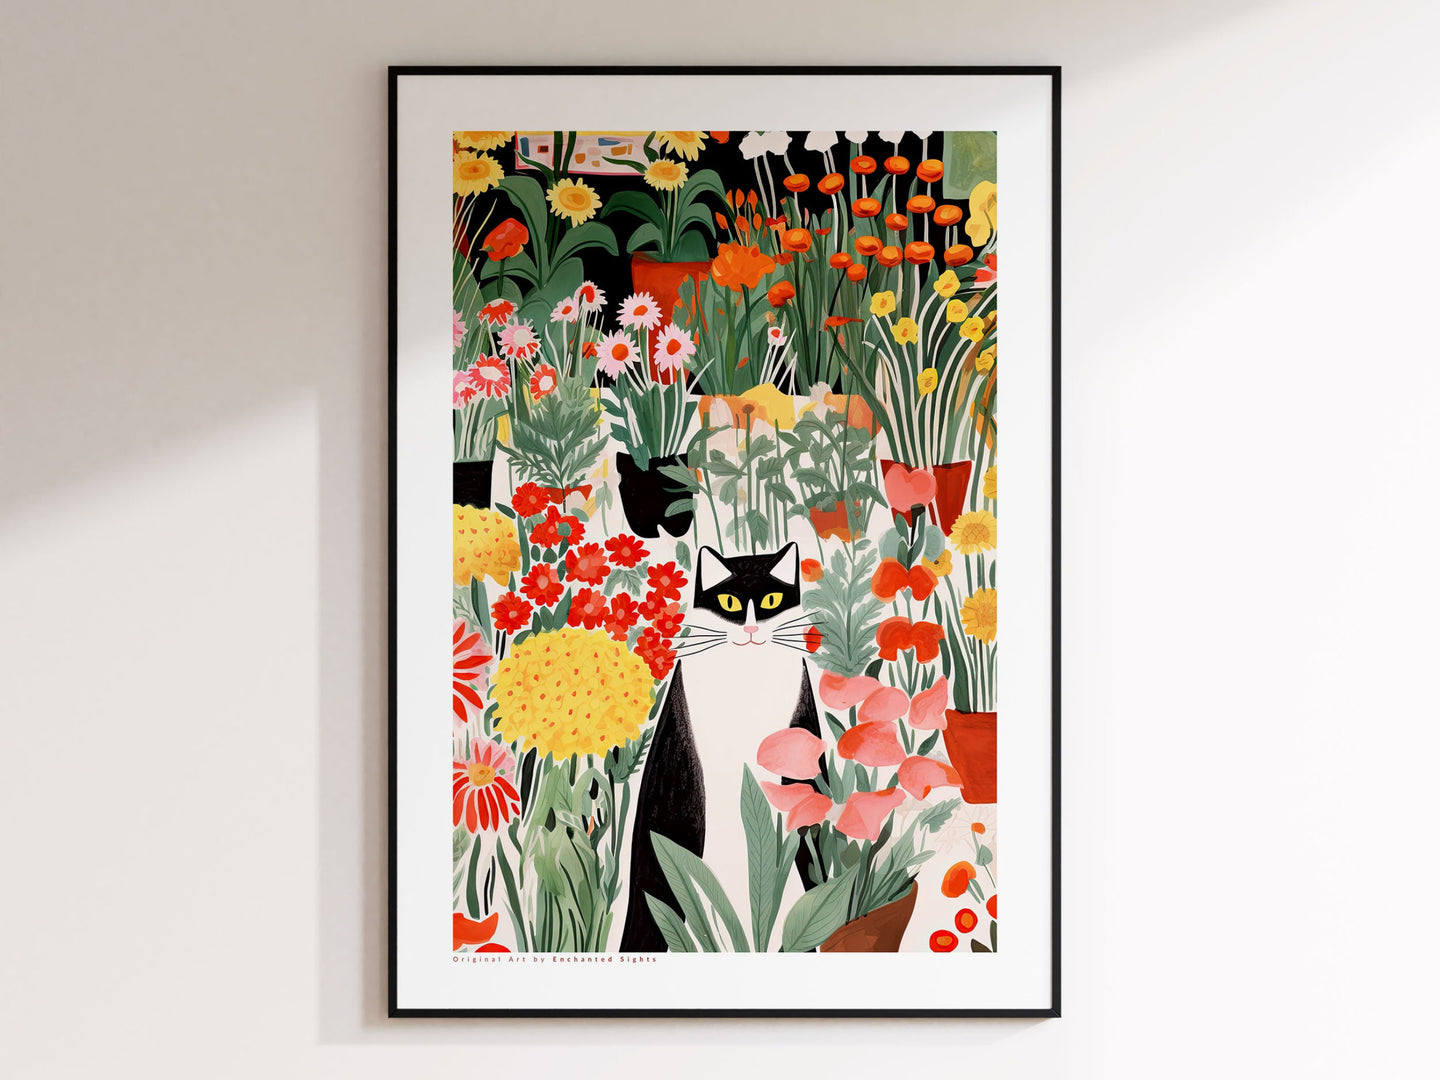 Cat in Garden, Flowers and Cats, Green Red Art, Flower Art Print, Cat Art Print, Cat Illustration, Floral Wall Decor, Gifts for Cat Lovers